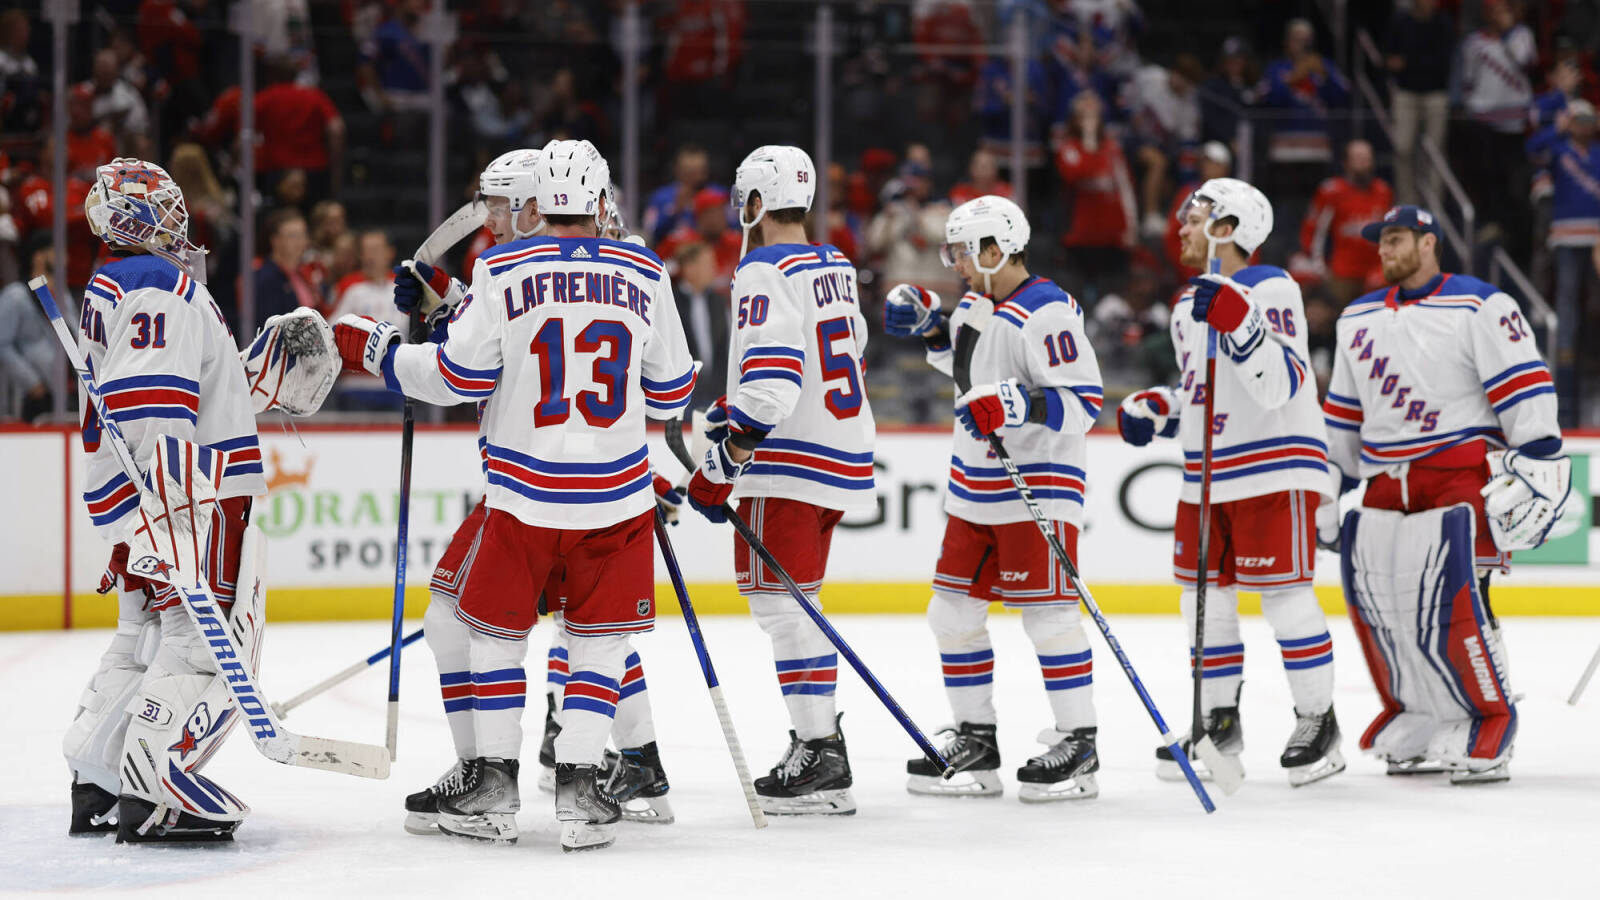 Rangers Sweep Capitals to Move On to Second Round